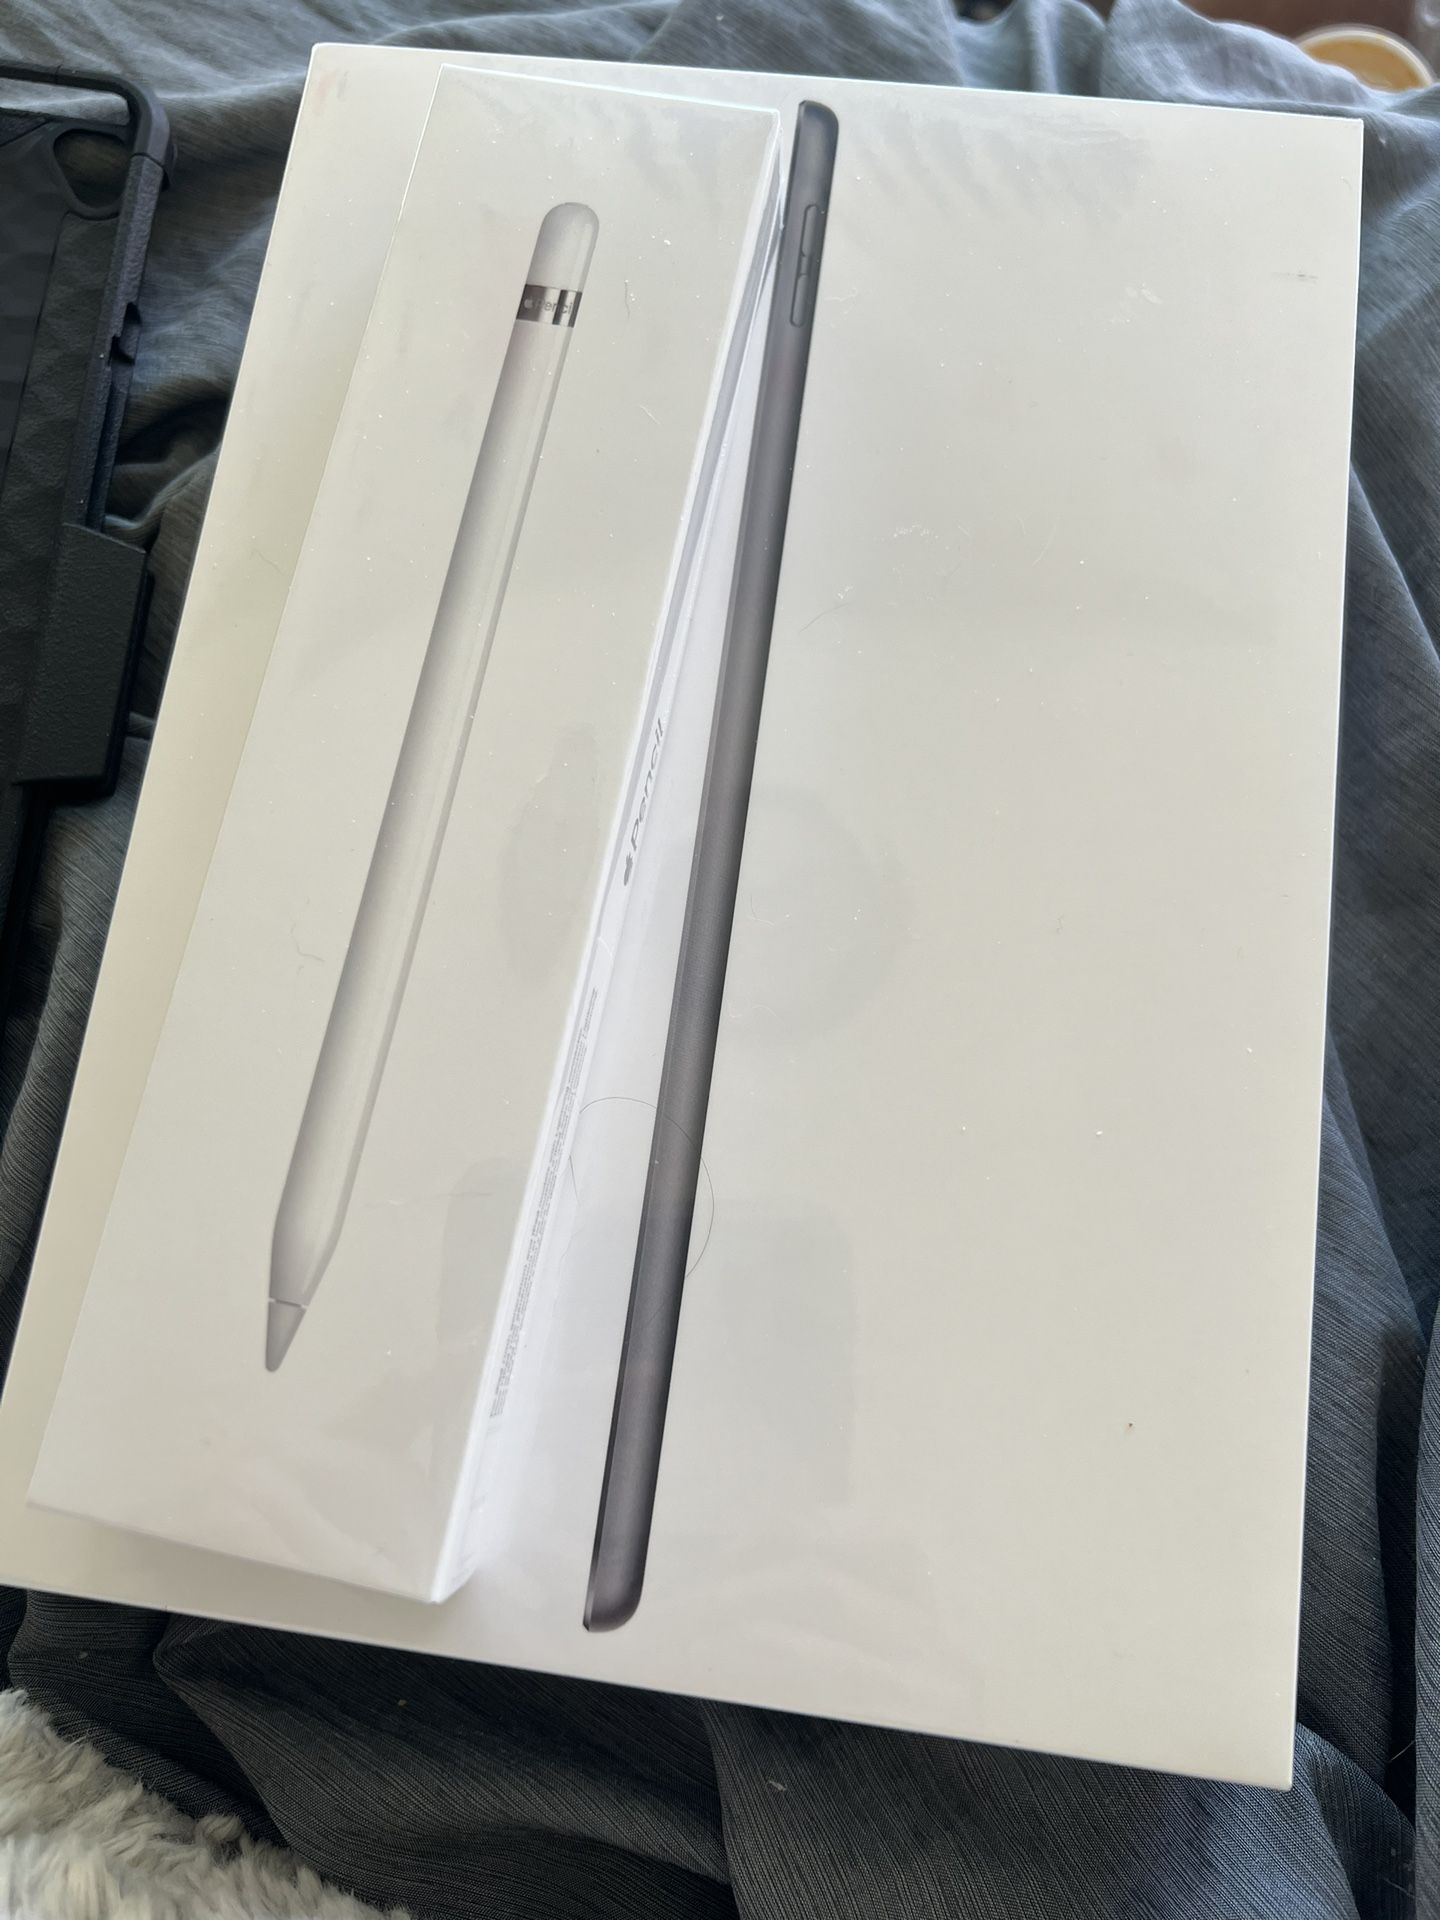 iPad+Apple Pencil+Case (WiFi+5G)  BRAND NEW IN PGKNG